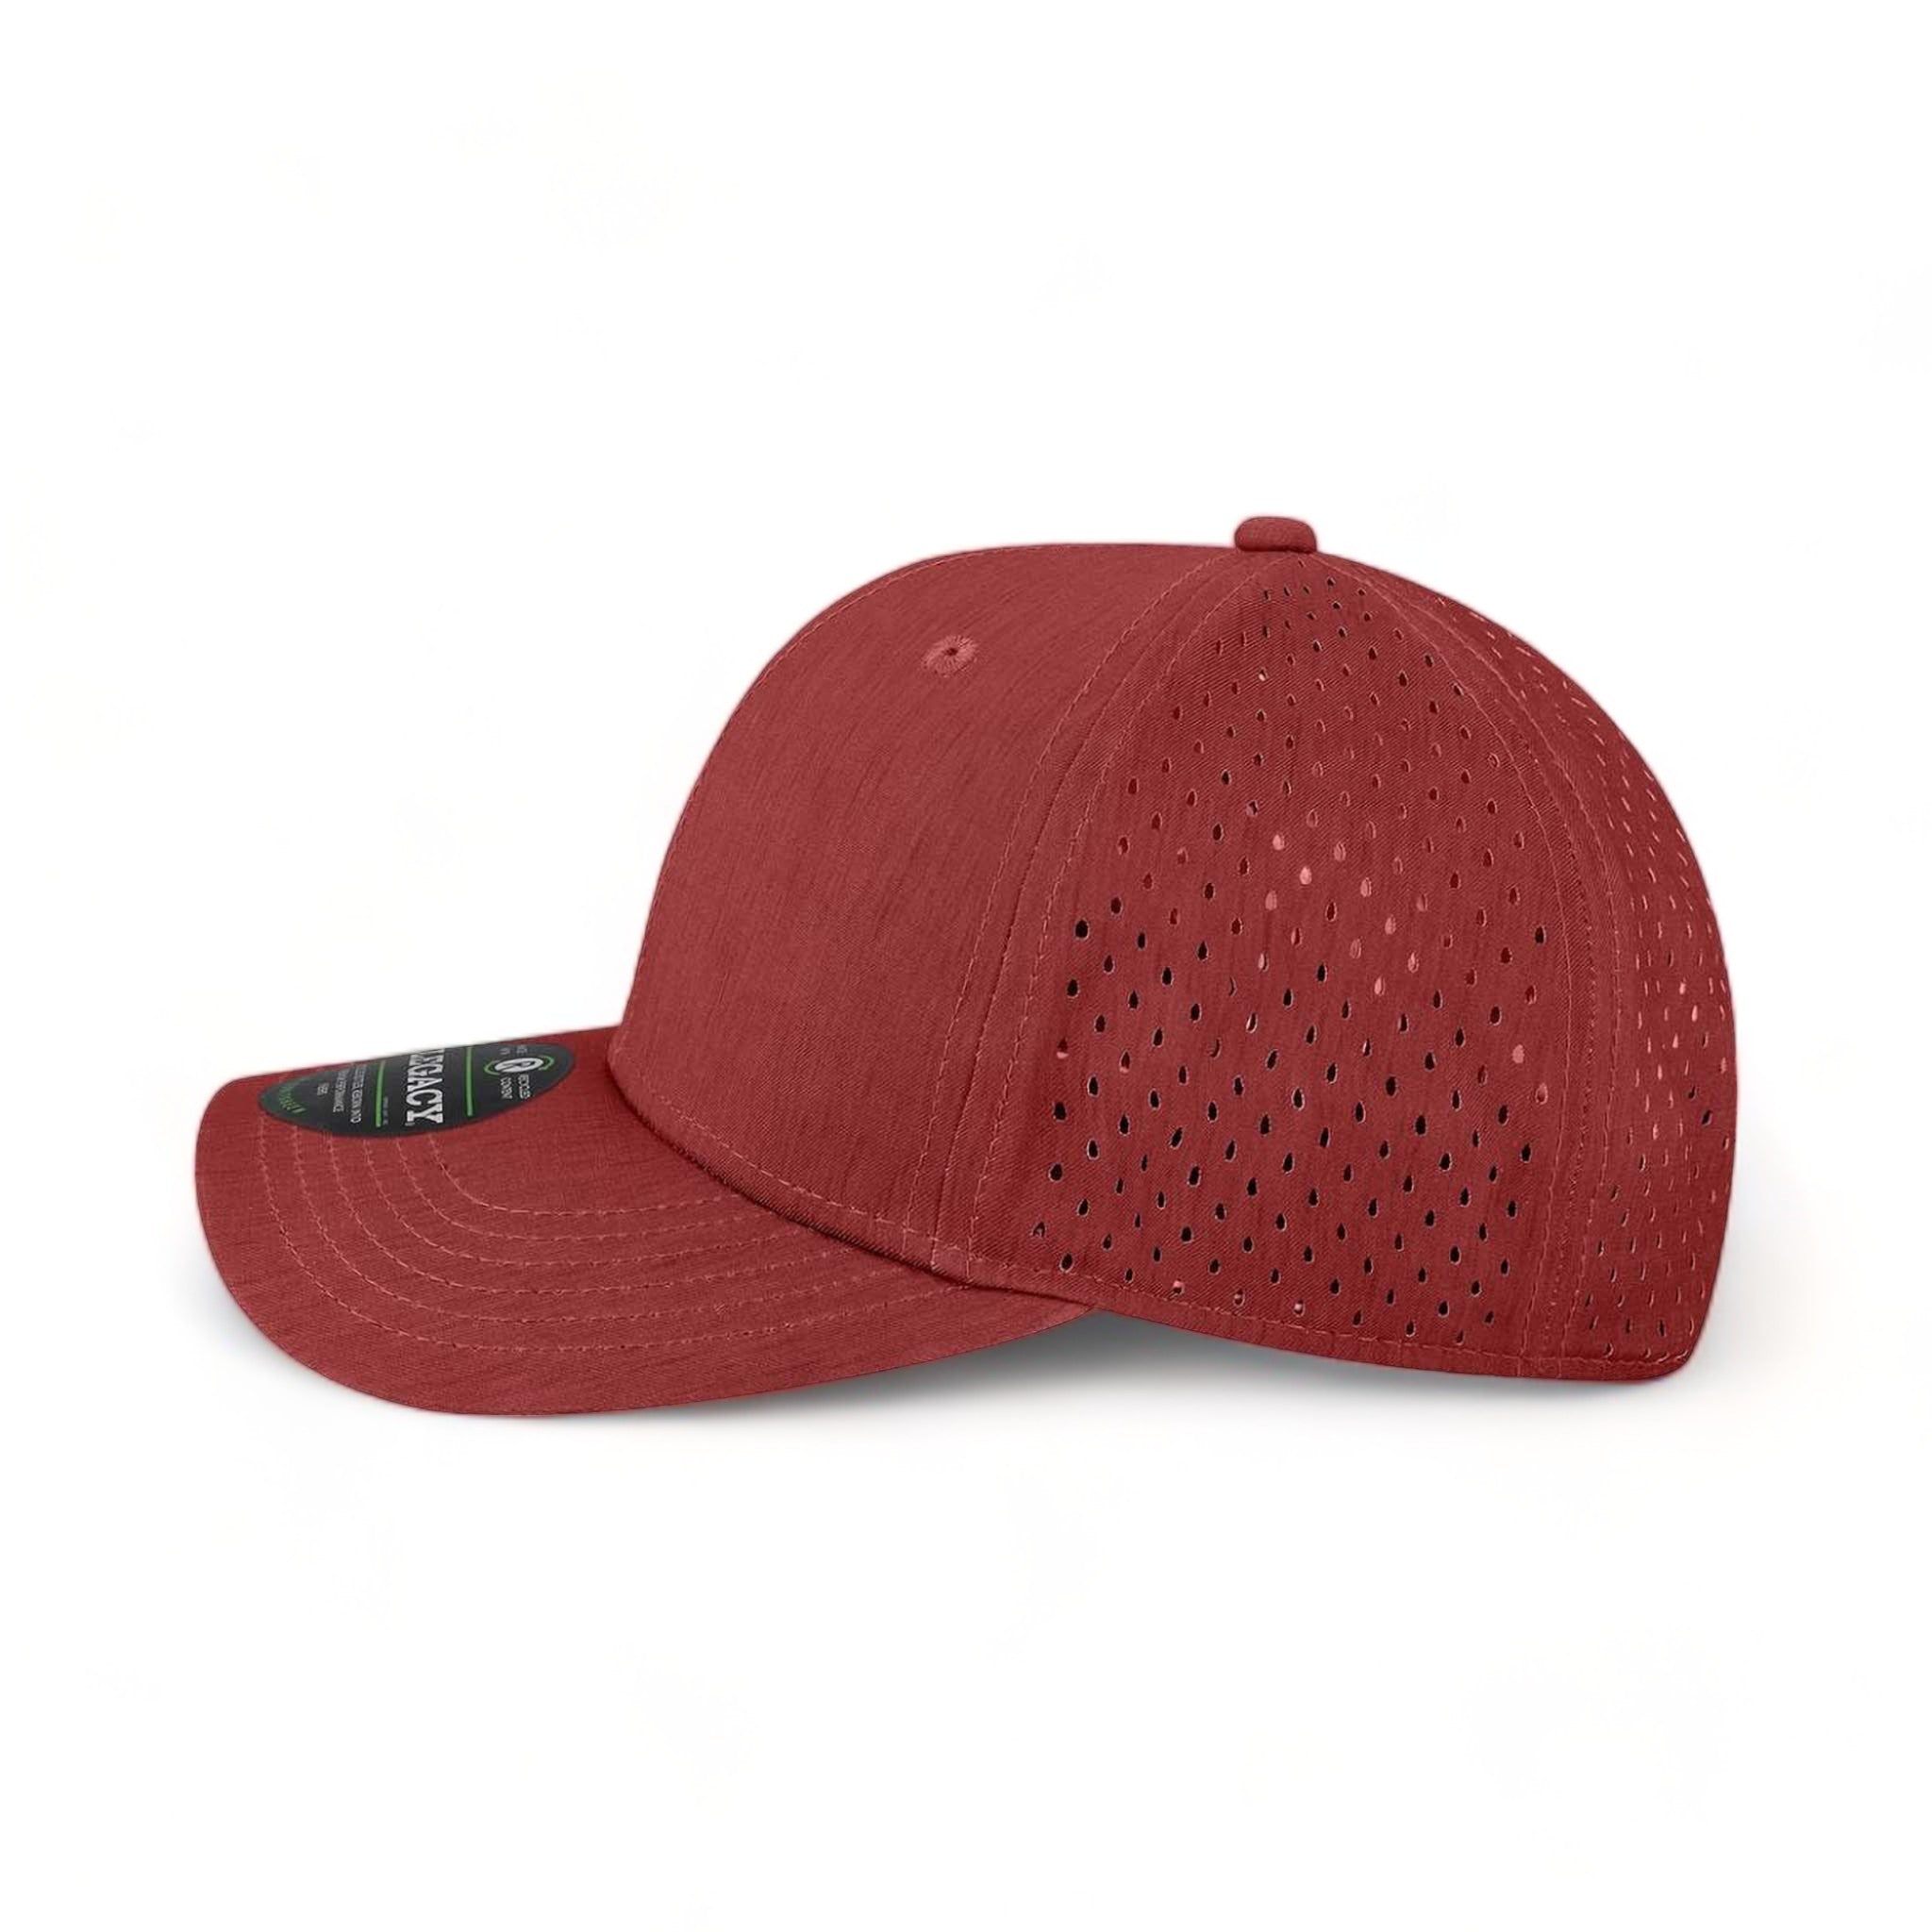 Side view of LEGACY REMPA custom hat in eco maroon